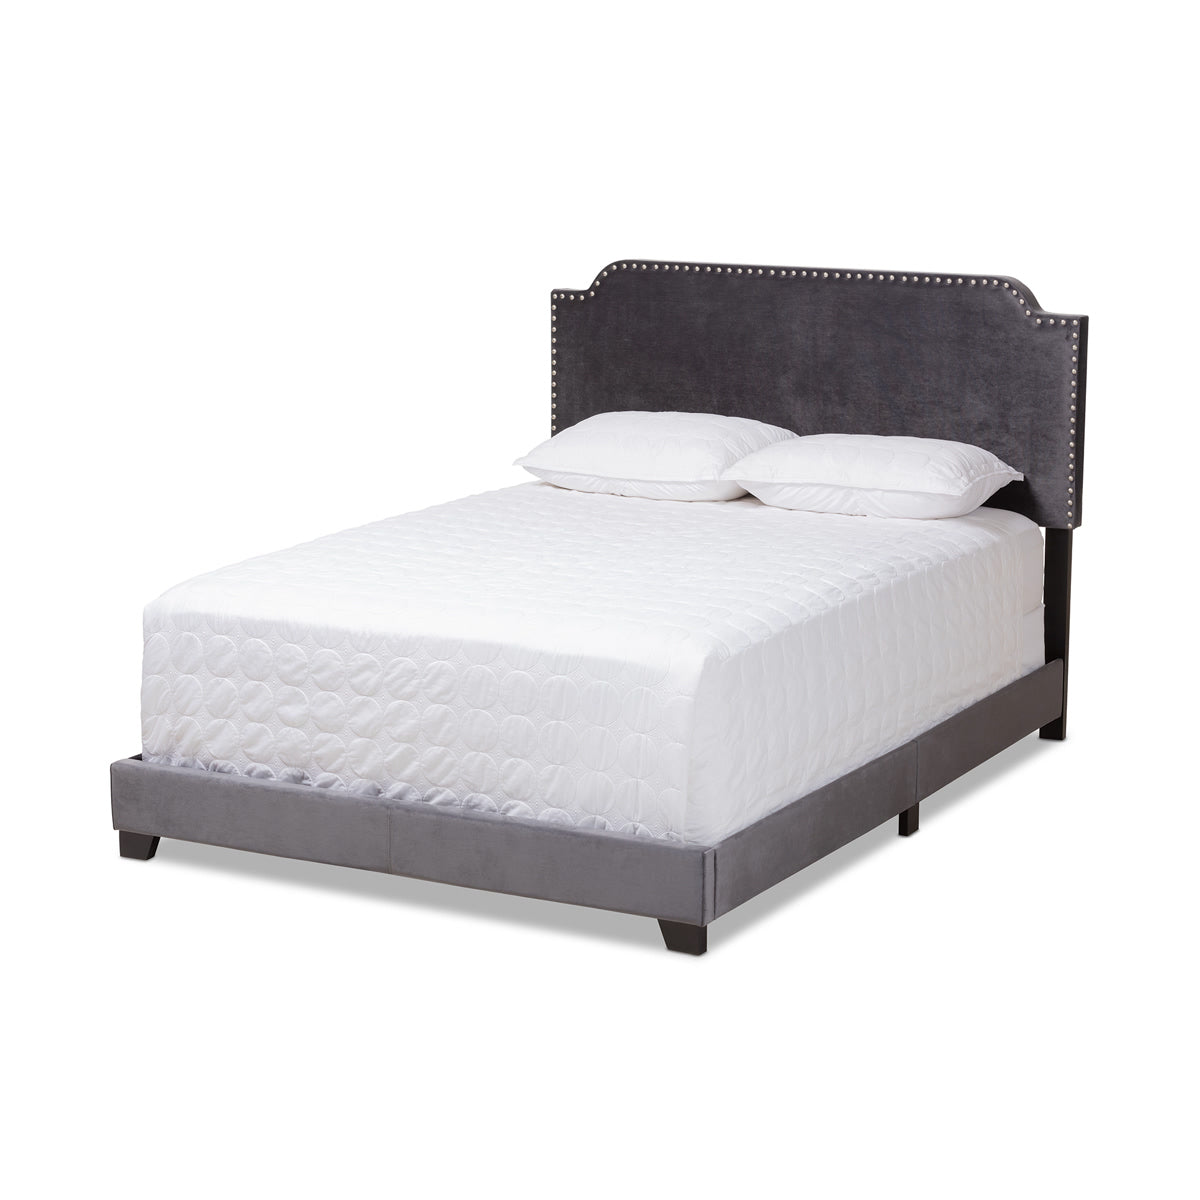 Baxton Studio Darcy Luxe and Glamour Dark Grey Velvet Upholstered King Size Bed Baxton Studio-0-Minimal And Modern - 1